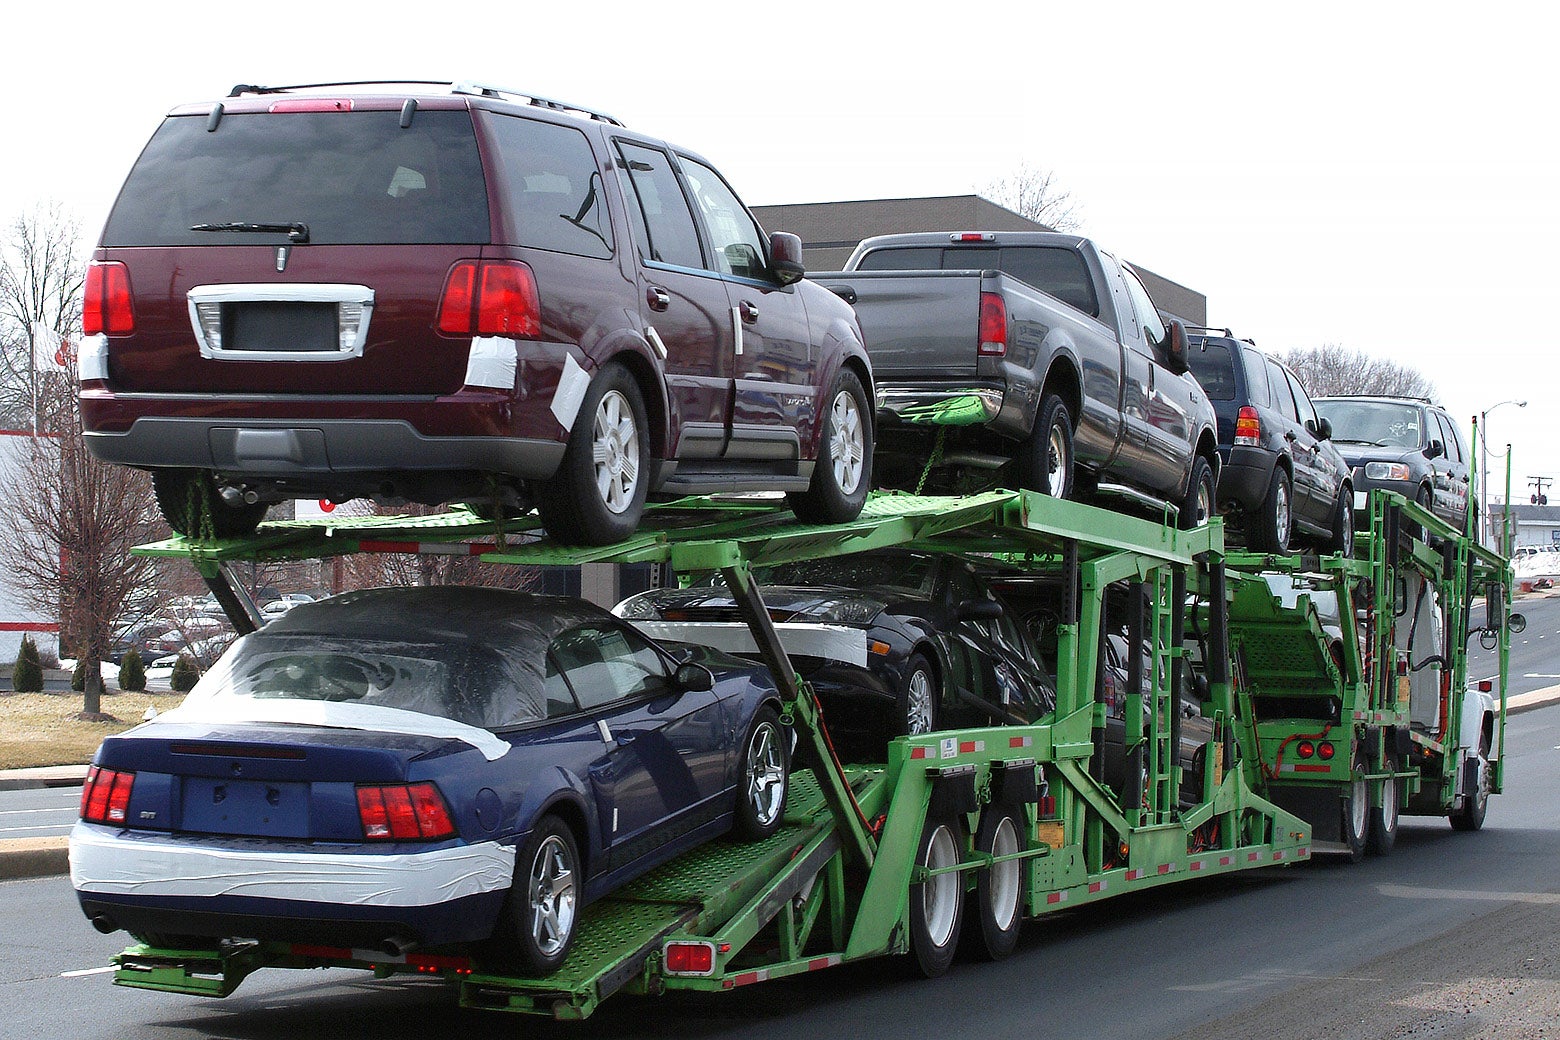 A green auto hauler carries eight vehicles, from sedans to SUVs to large trucks.